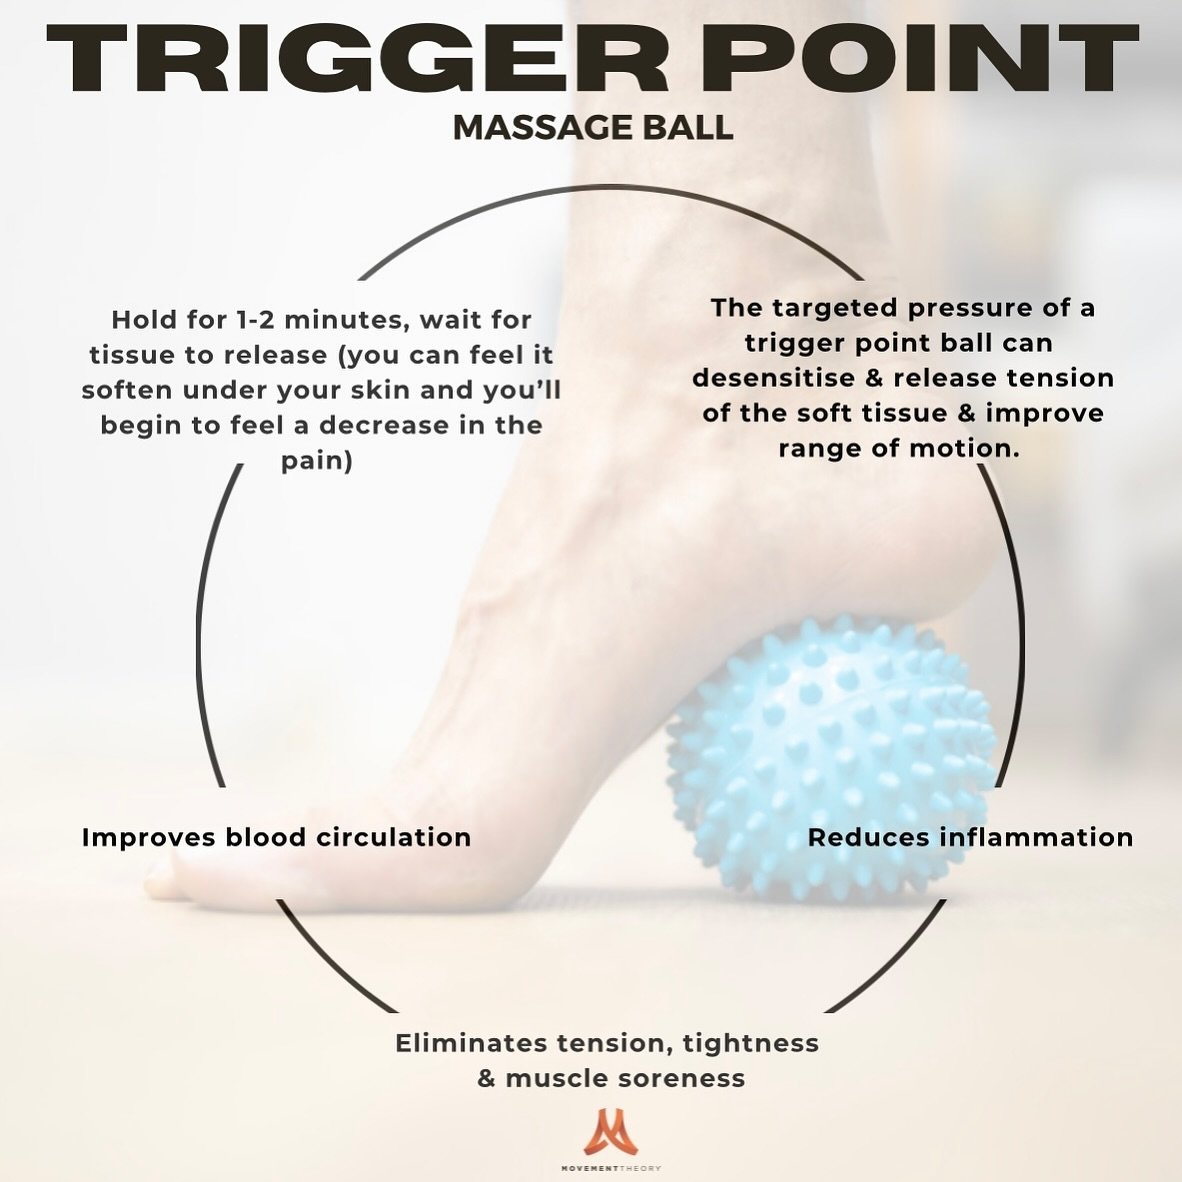 Feeling sore? After something that&rsquo;s easy and in the comfort of your own home? 

Trigger balls, also known as massage balls - might be something you are missing in your daily self-care routine!

Using trigger balls can offer multiple benefits f